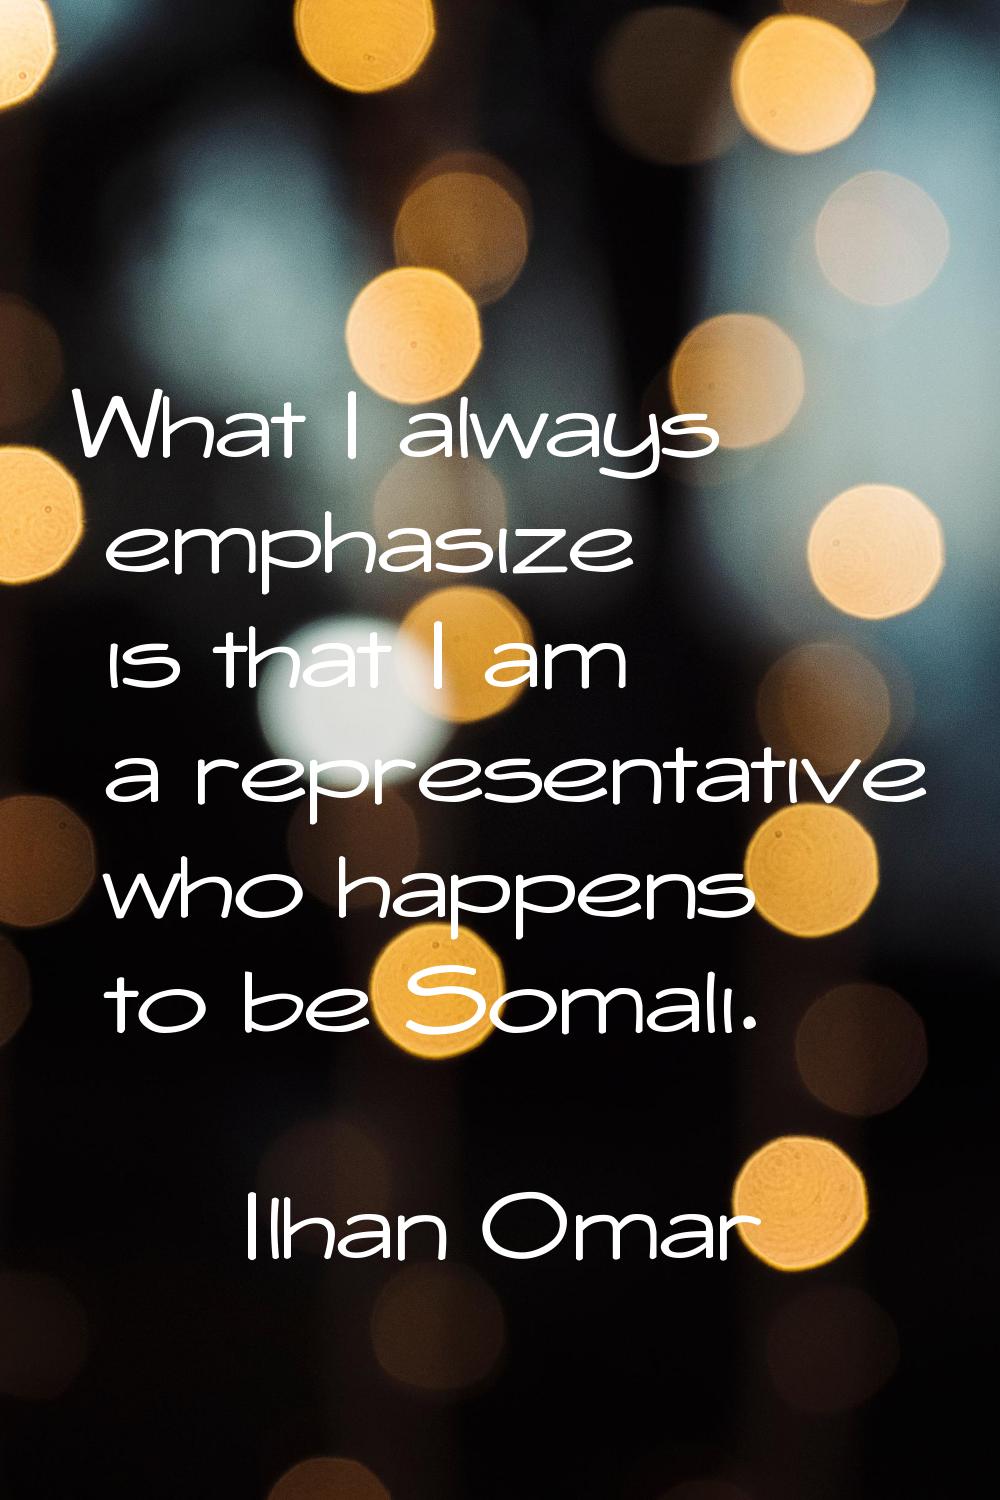 What I always emphasize is that I am a representative who happens to be Somali.